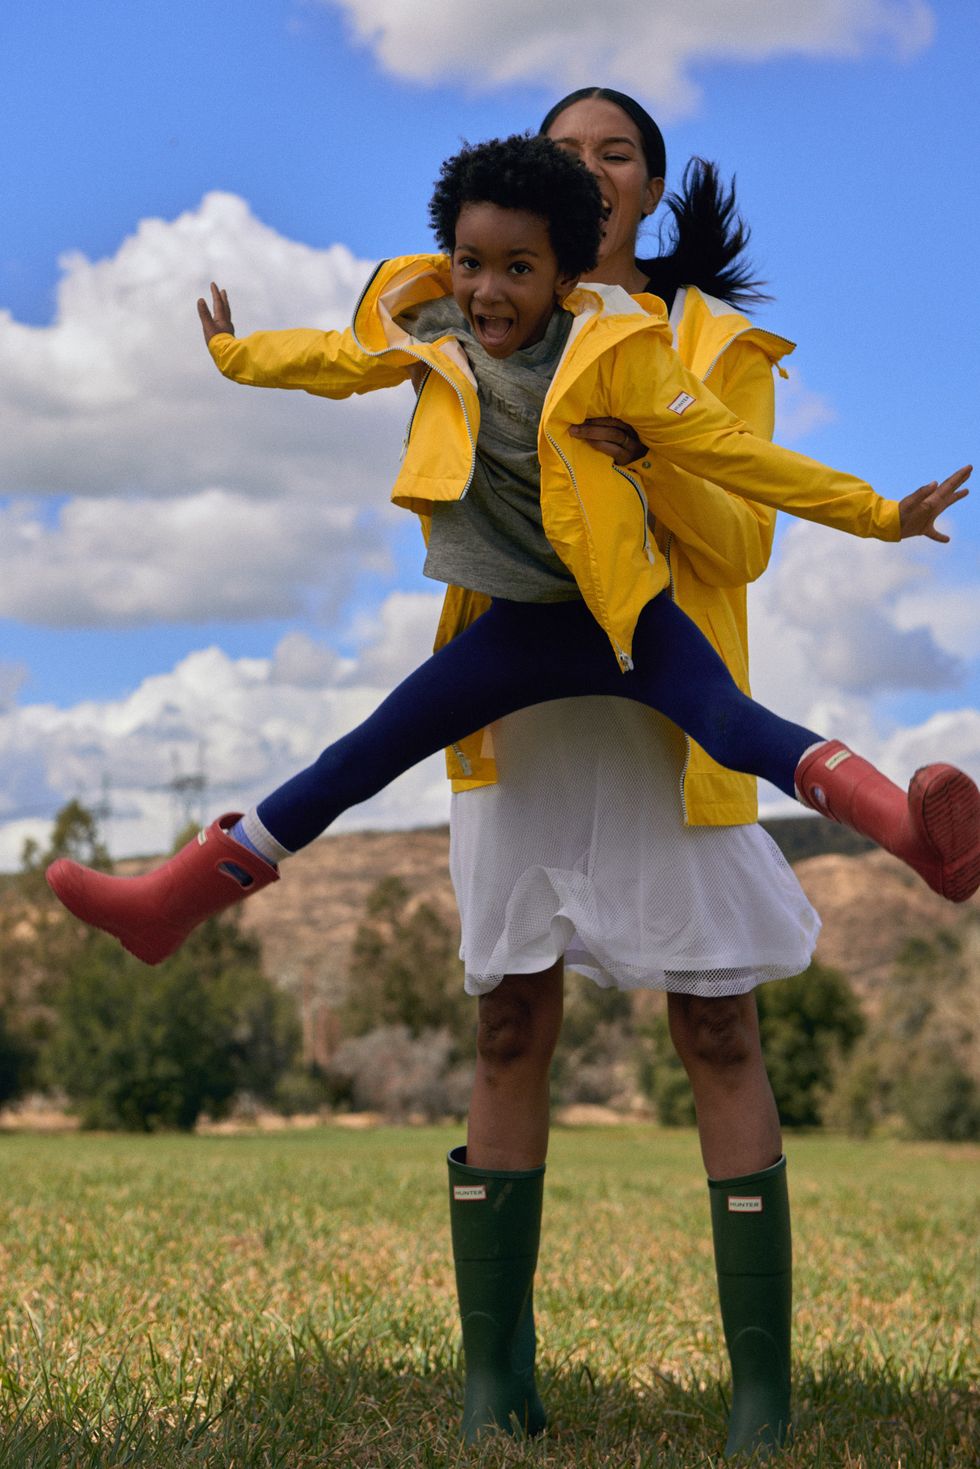 People in nature, Happy, Fun, Jumping, Sky, Uniform, Photography, Smile, Stock photography, Kick, 